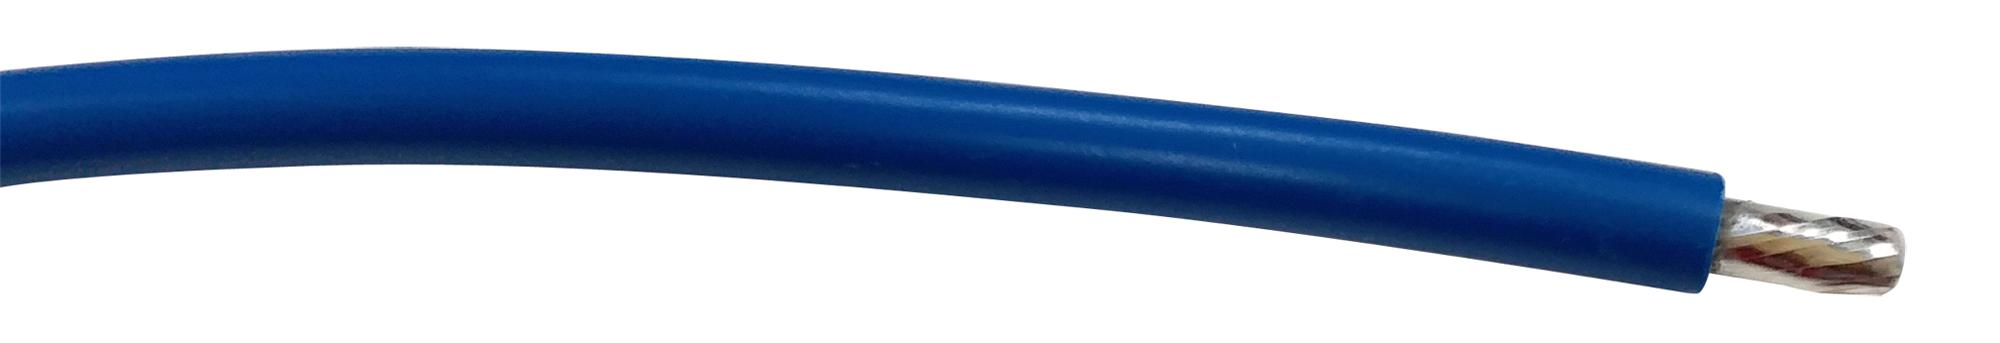 PP002555 CABLE WIRE, 22AWG, BLUE, 305M PRO POWER